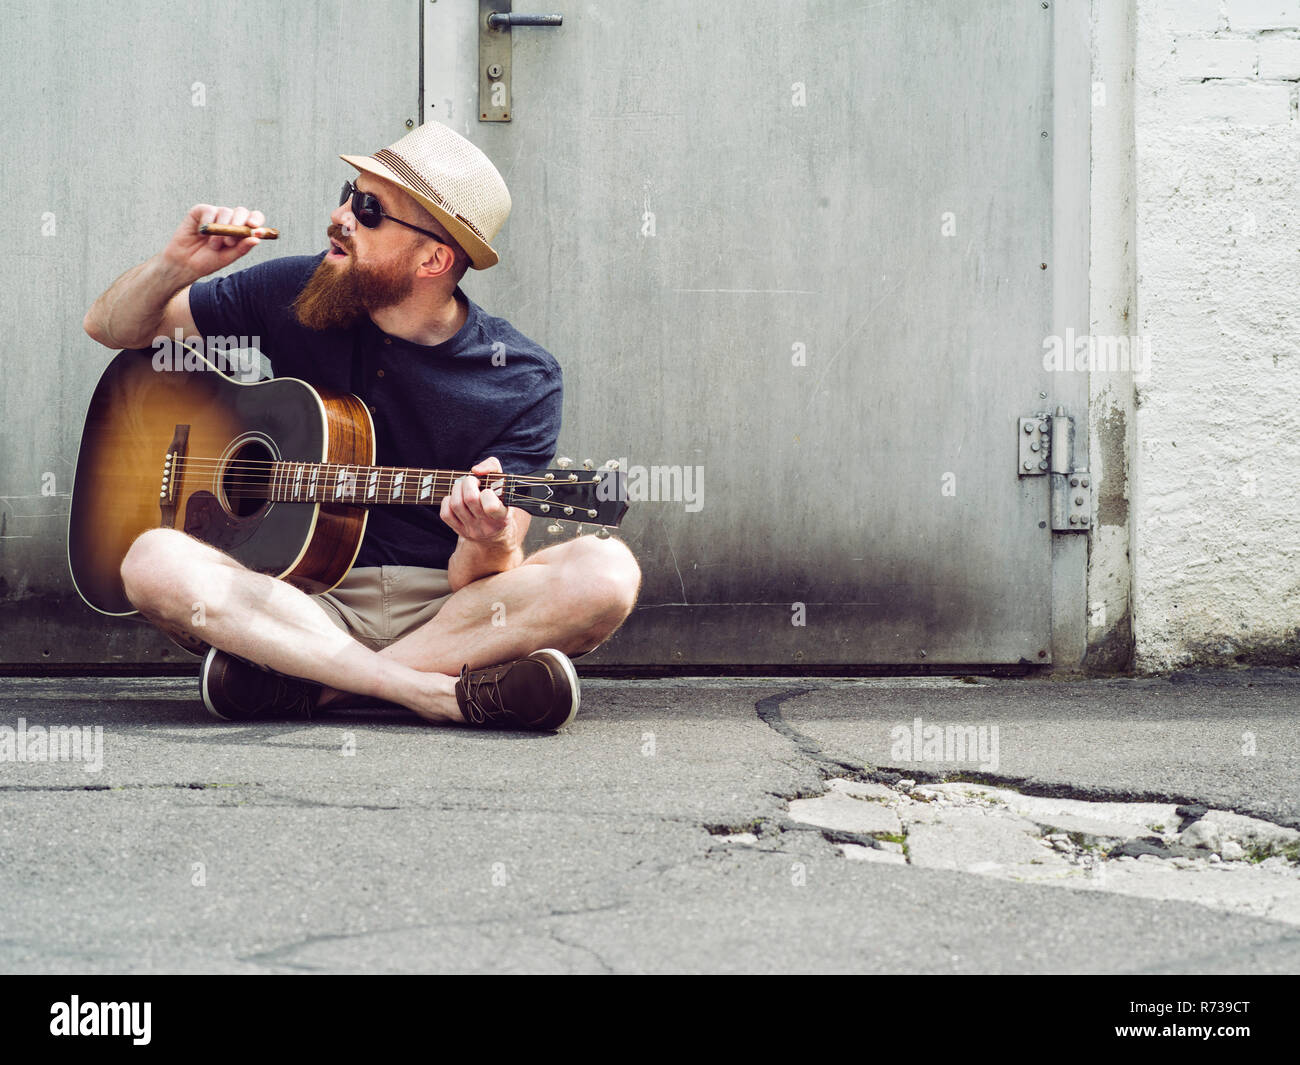 Bearded man playing acoustic guitar and smoking cigar Stock Photo